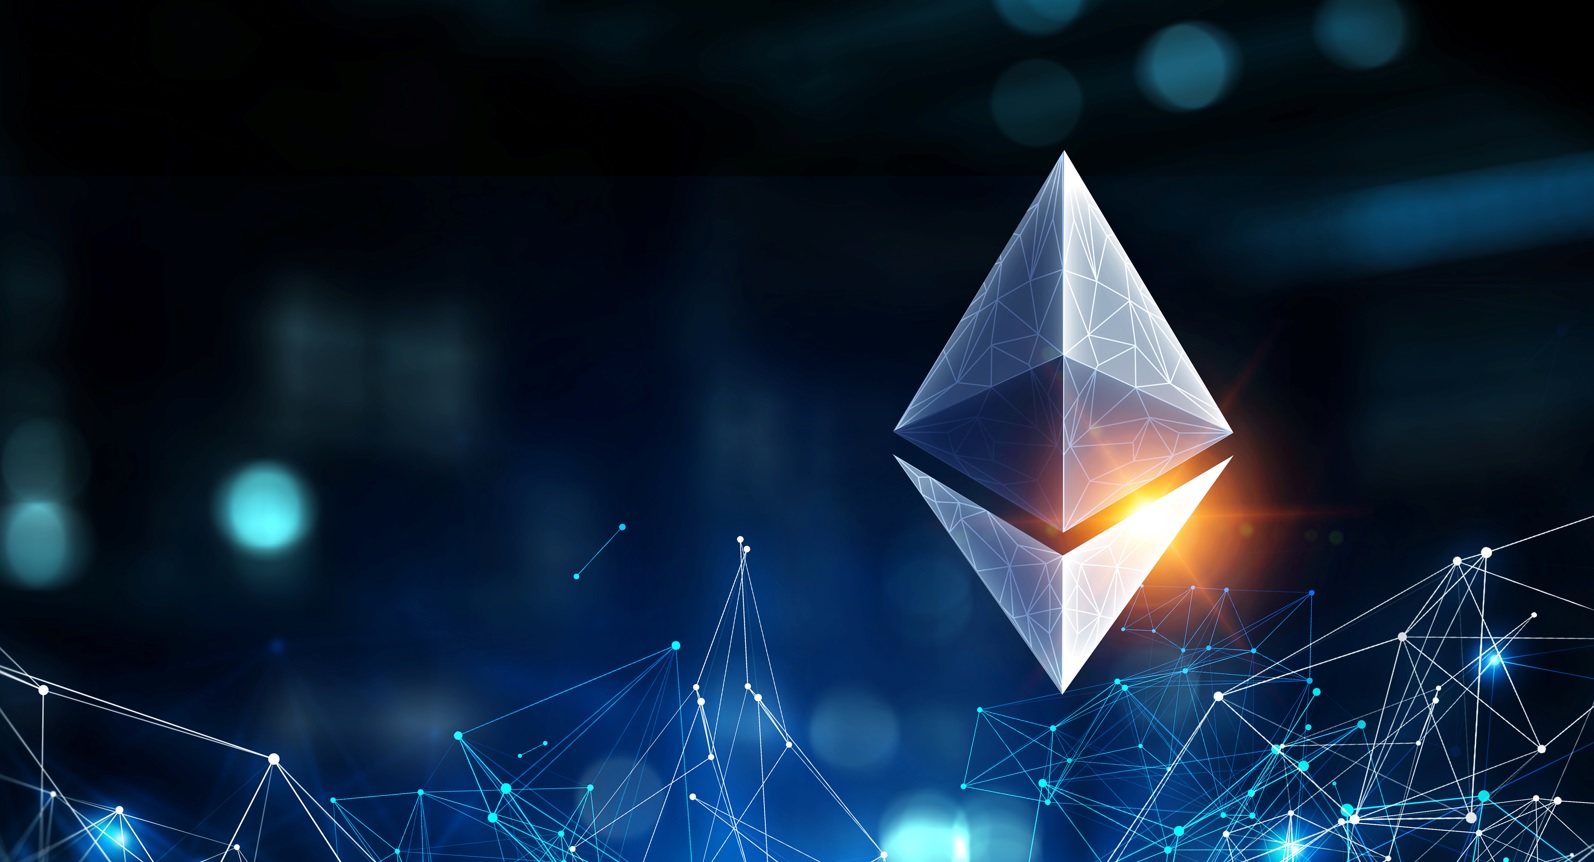 Should I Buy Ethereum? 5 Things You Should Consider